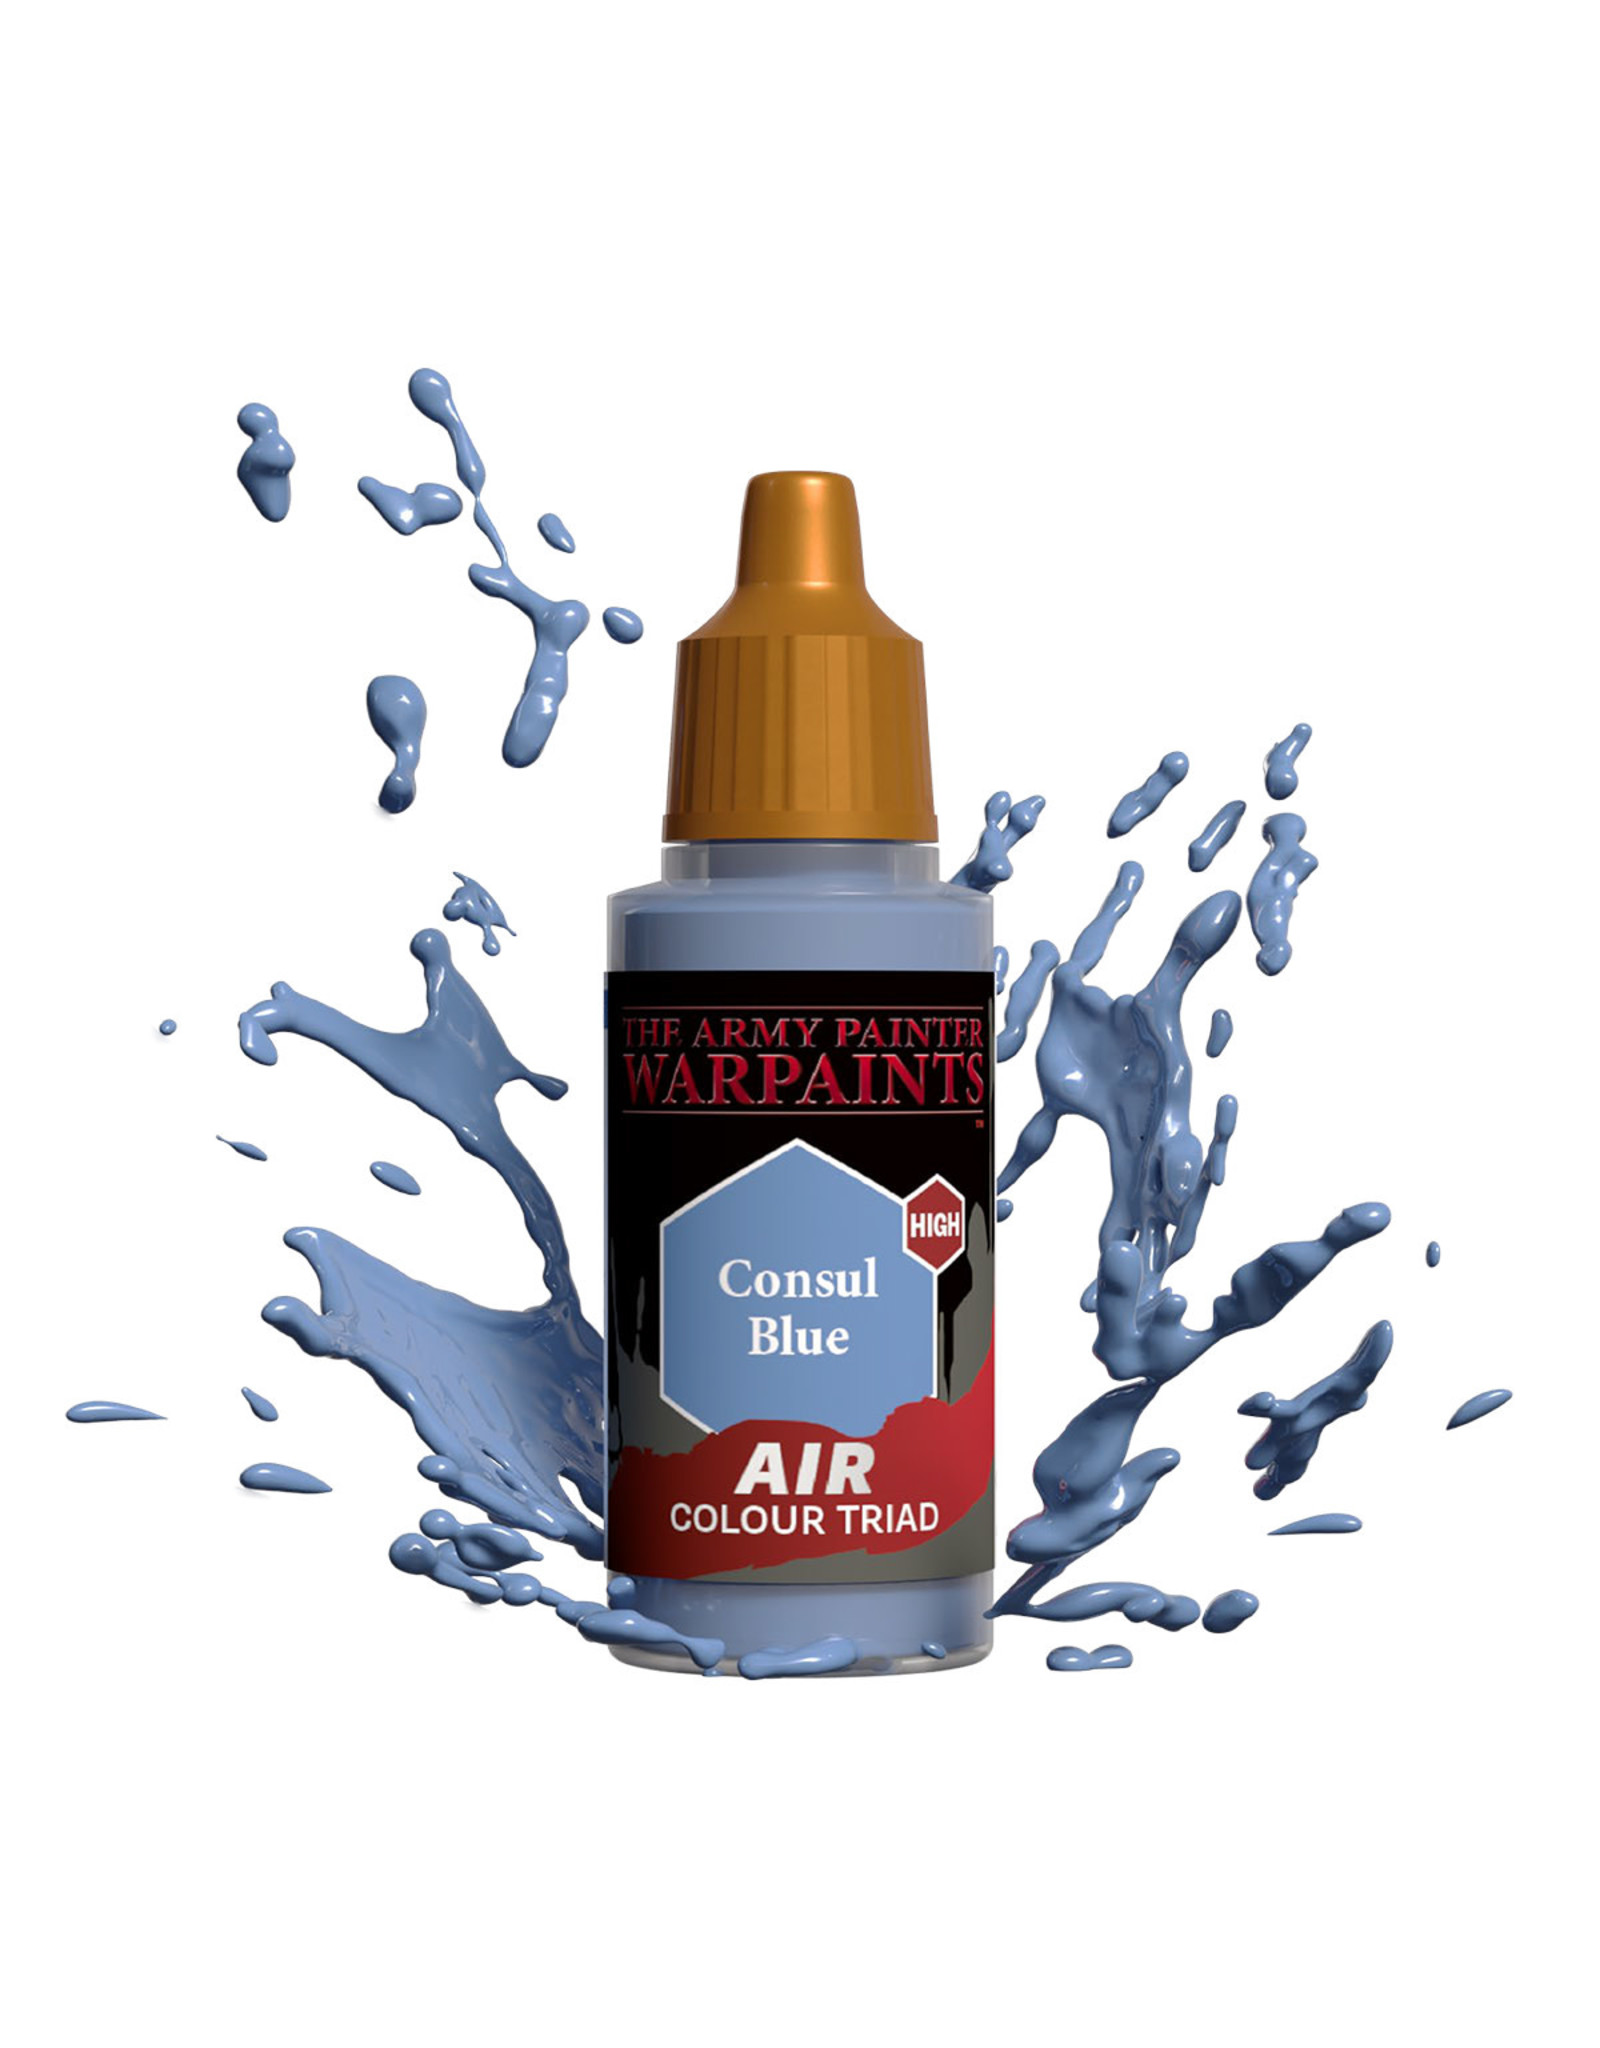 The Army Painter The Army Painter Warpaints Air: Consul Blue